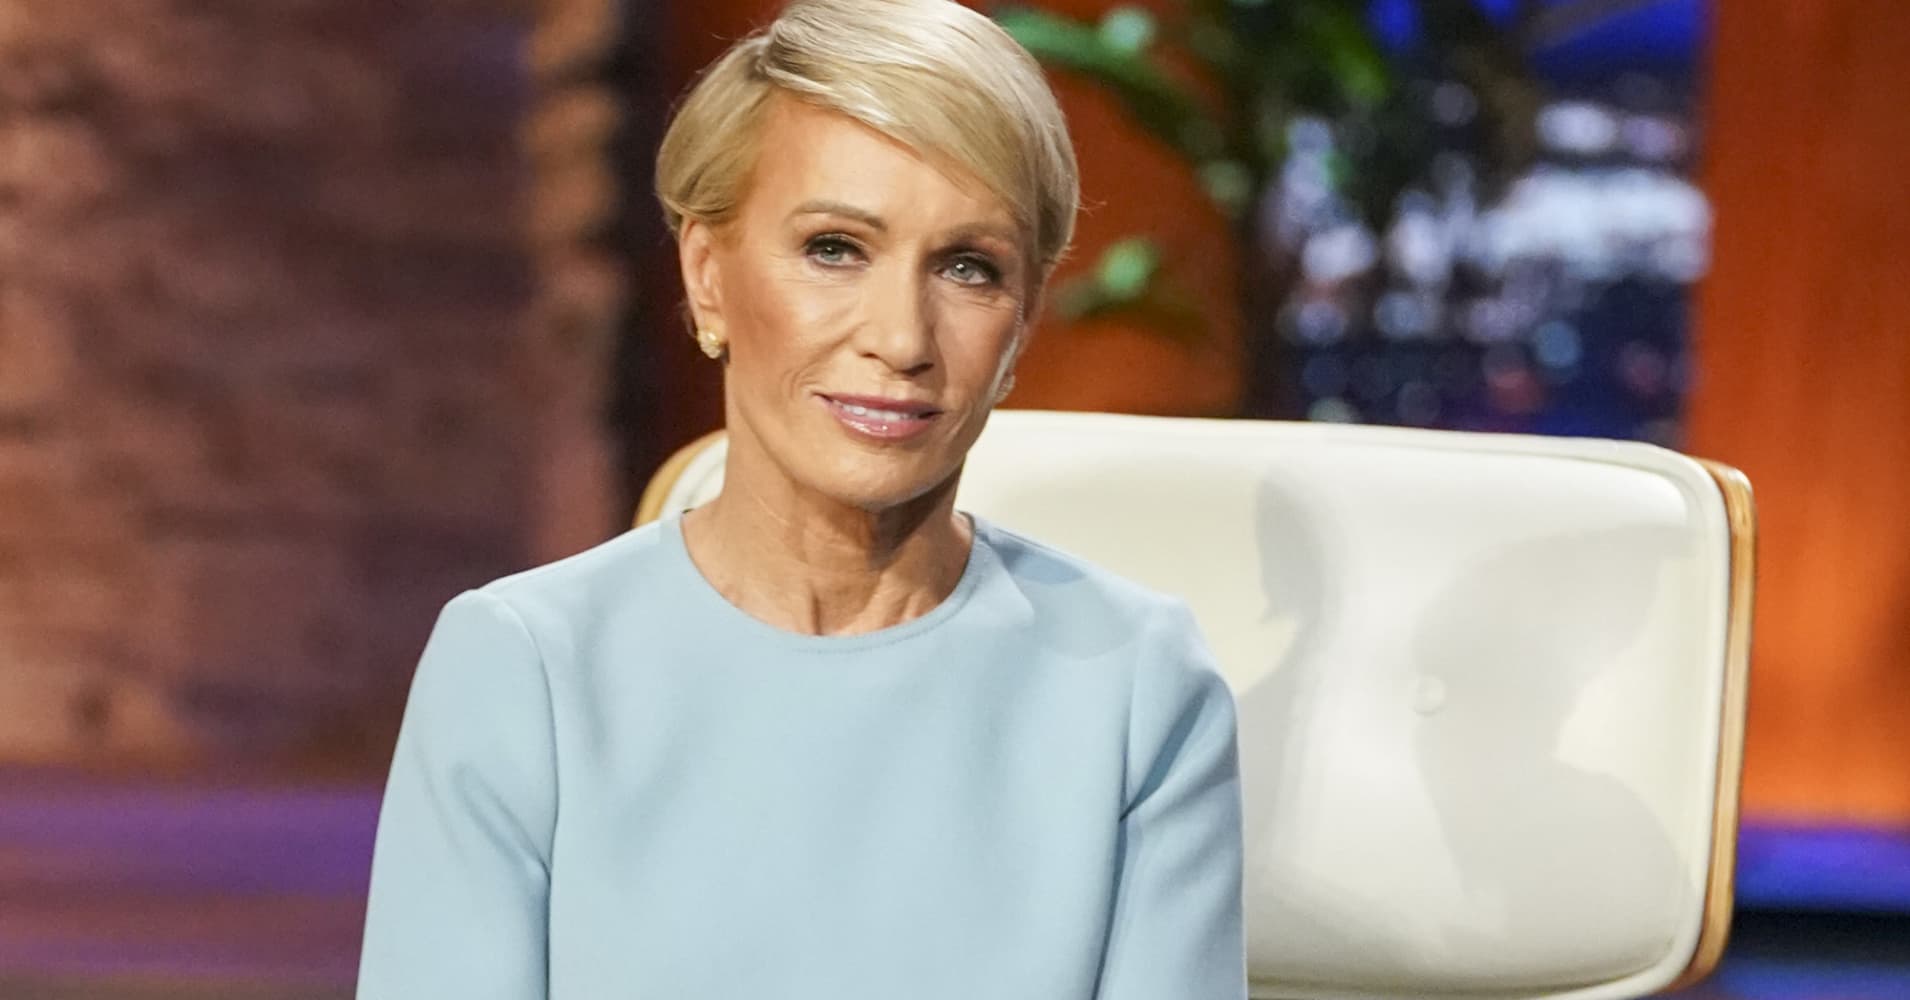 barbara corcoran shares the no. 1 trait her best employees have: 'they drove me crazy, but i admired my superstars so much'